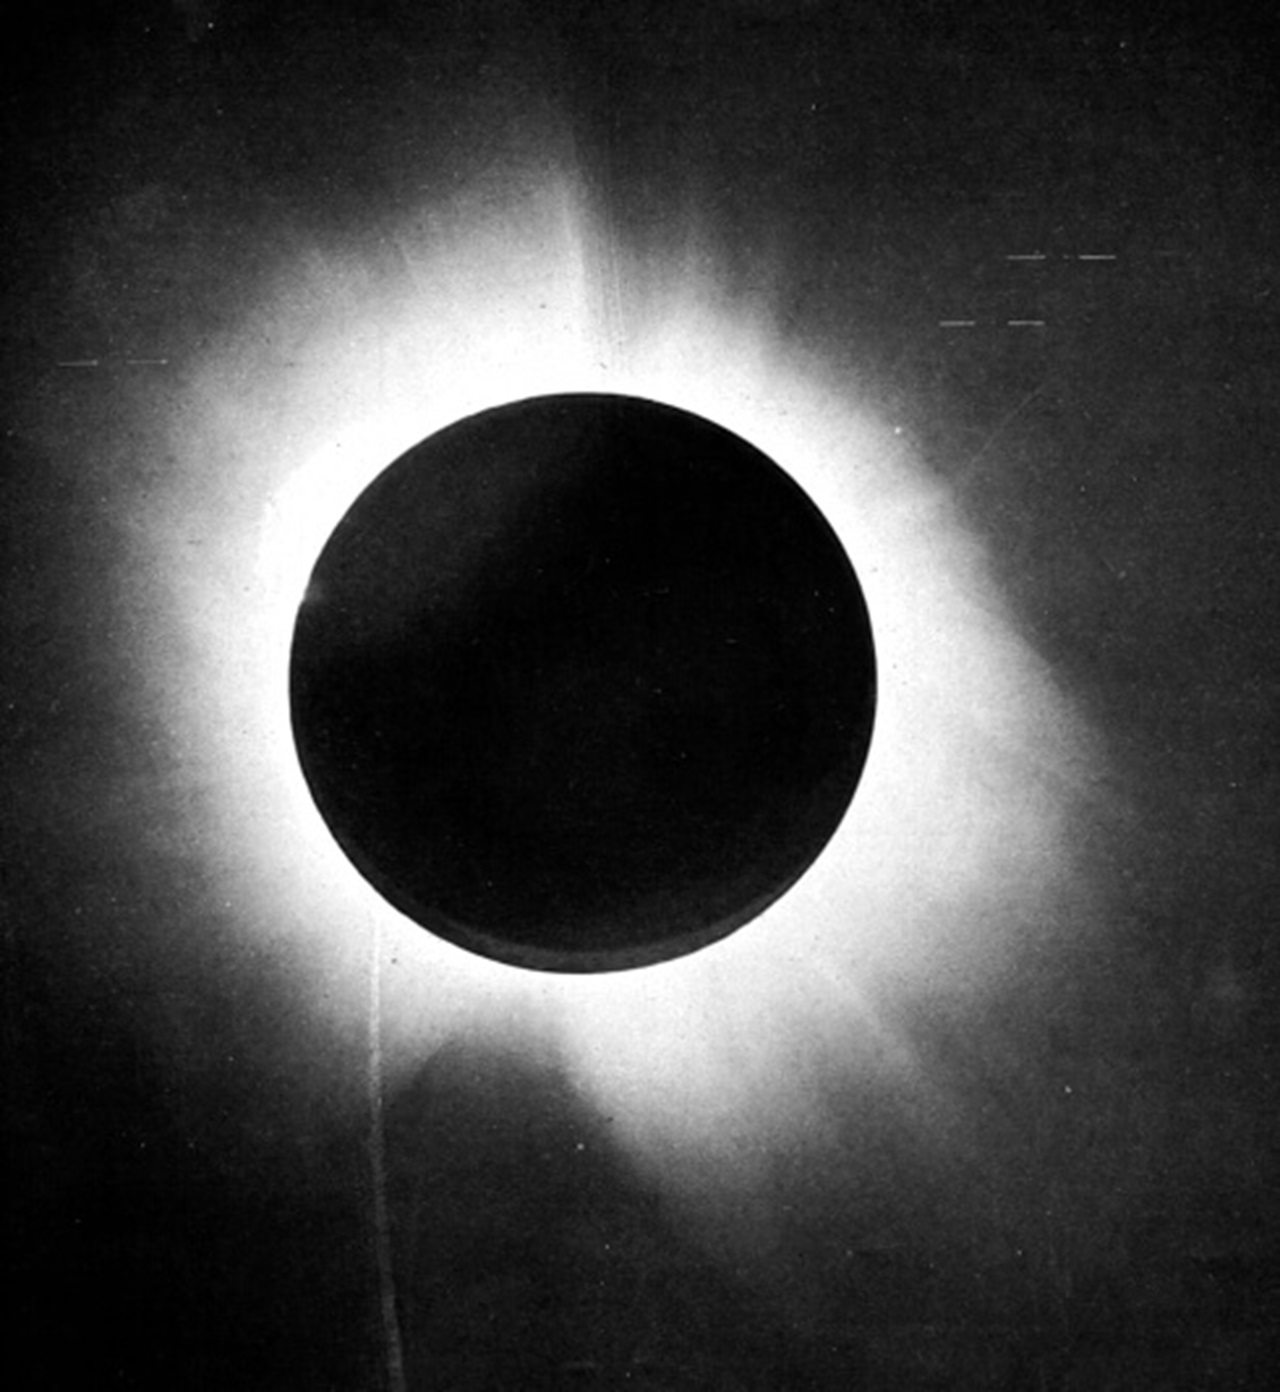 Astrophysicist saw the eclipse as an opportunity to test Einstein's theory